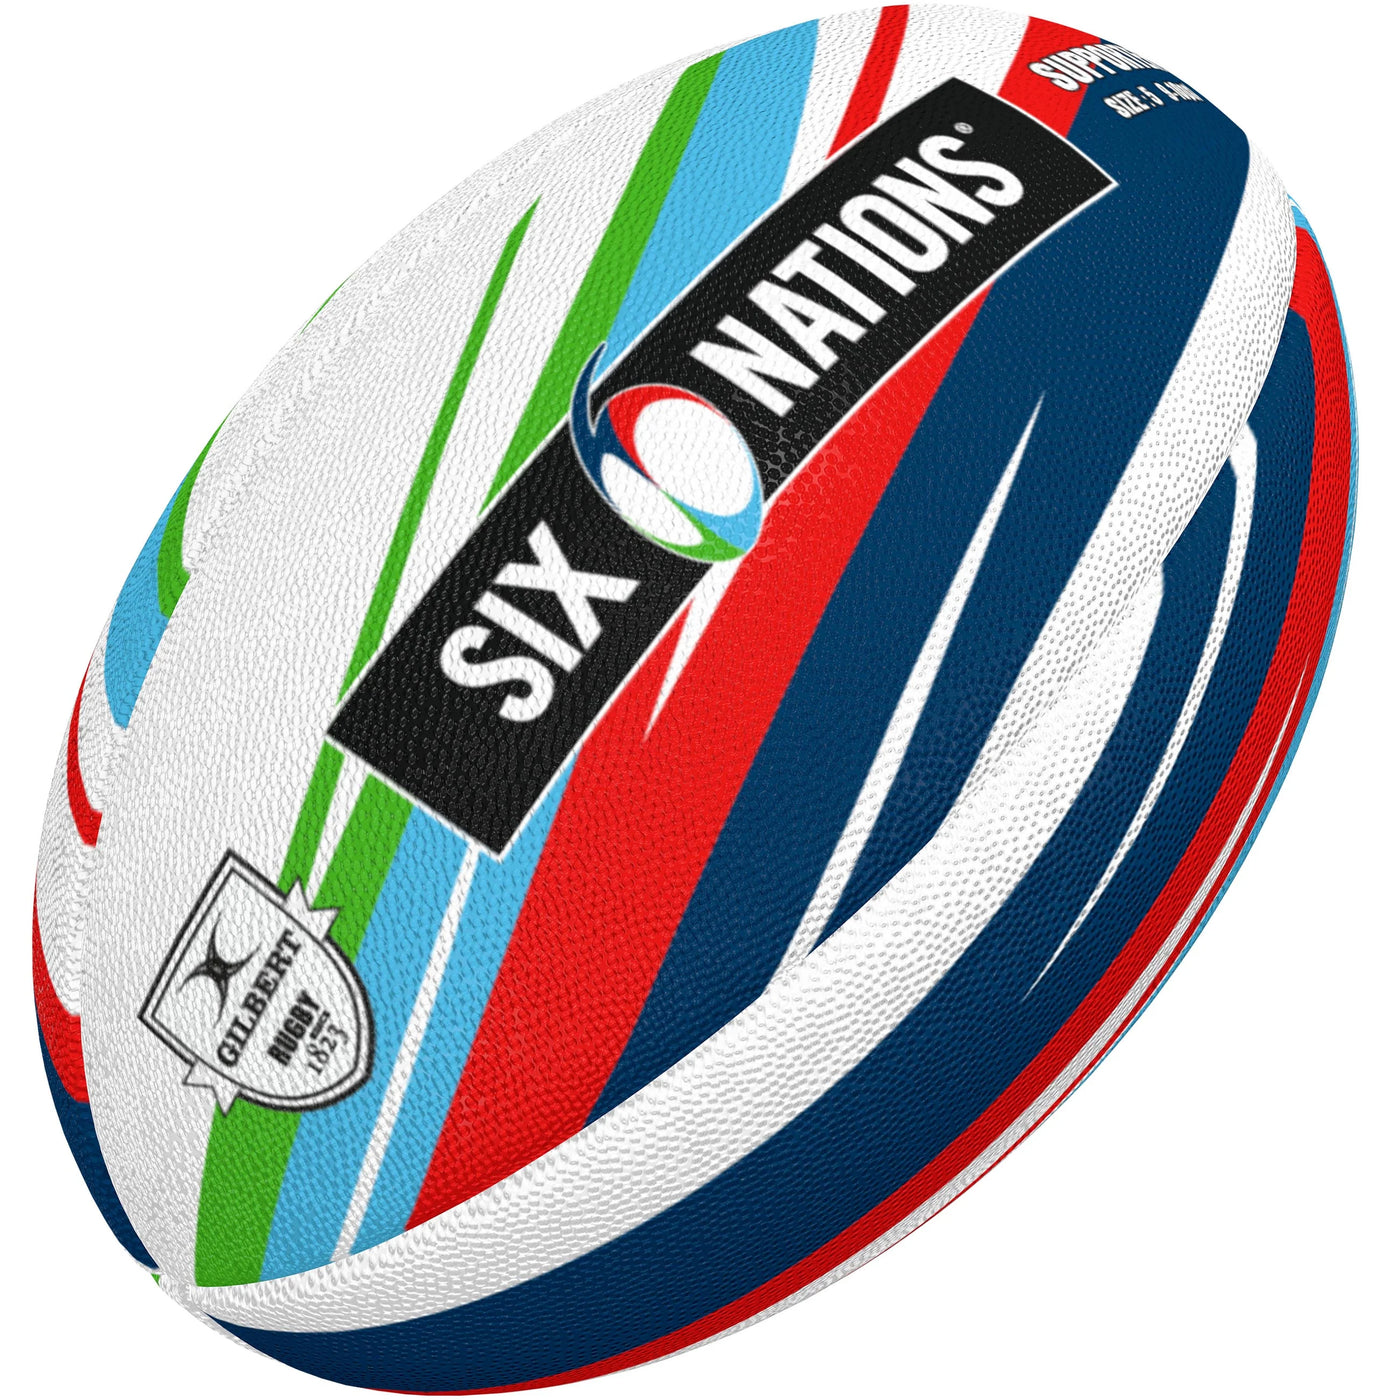 Ballon de Rugby Supporter des 6 Nations Taille 5